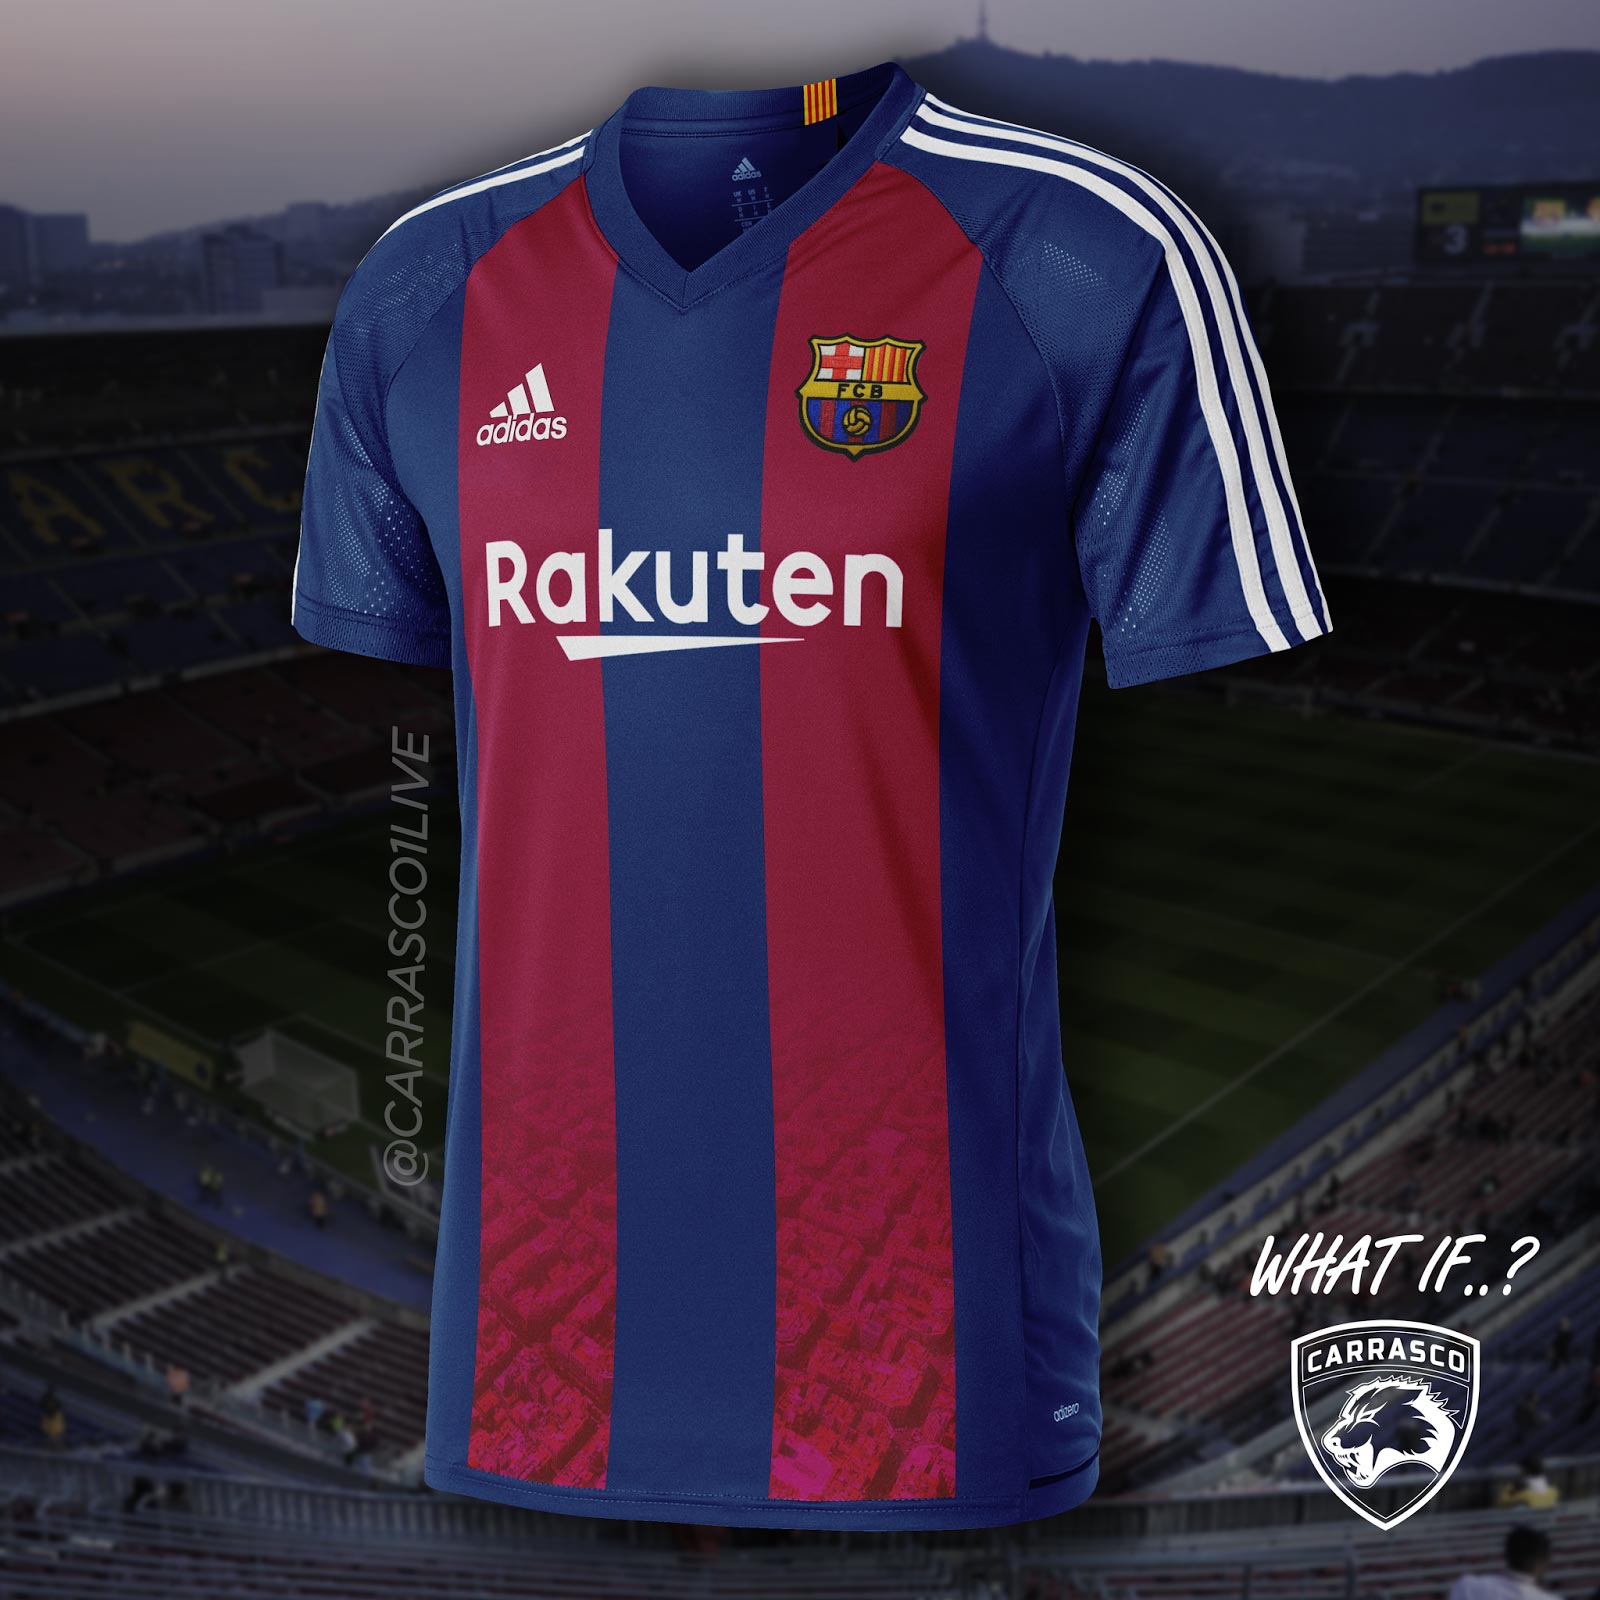 What If? Adidas FC Barcelona, Atlético Madrid & Malaga Concept Kits by Carrasco - Footy